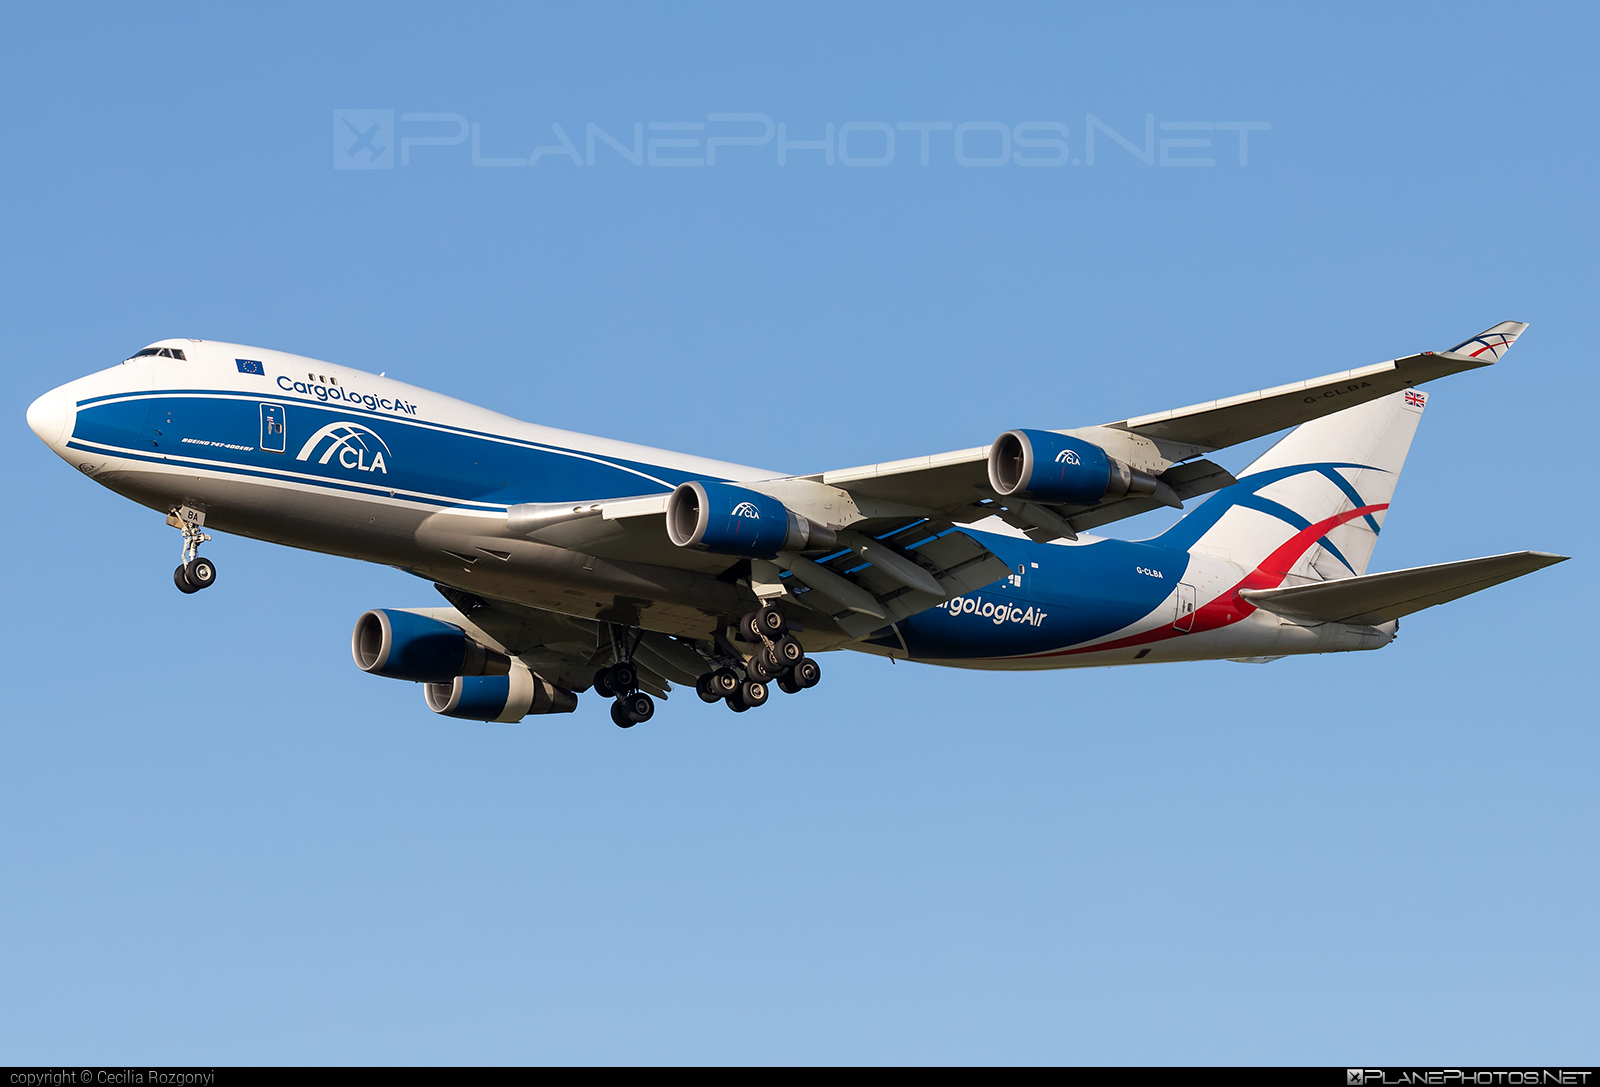 Boeing 747-400ERF - G-CLBA operated by CargoLogicAir #b747 #b747erf #b747freighter #boeing #boeing747 #cargologicair #jumbo